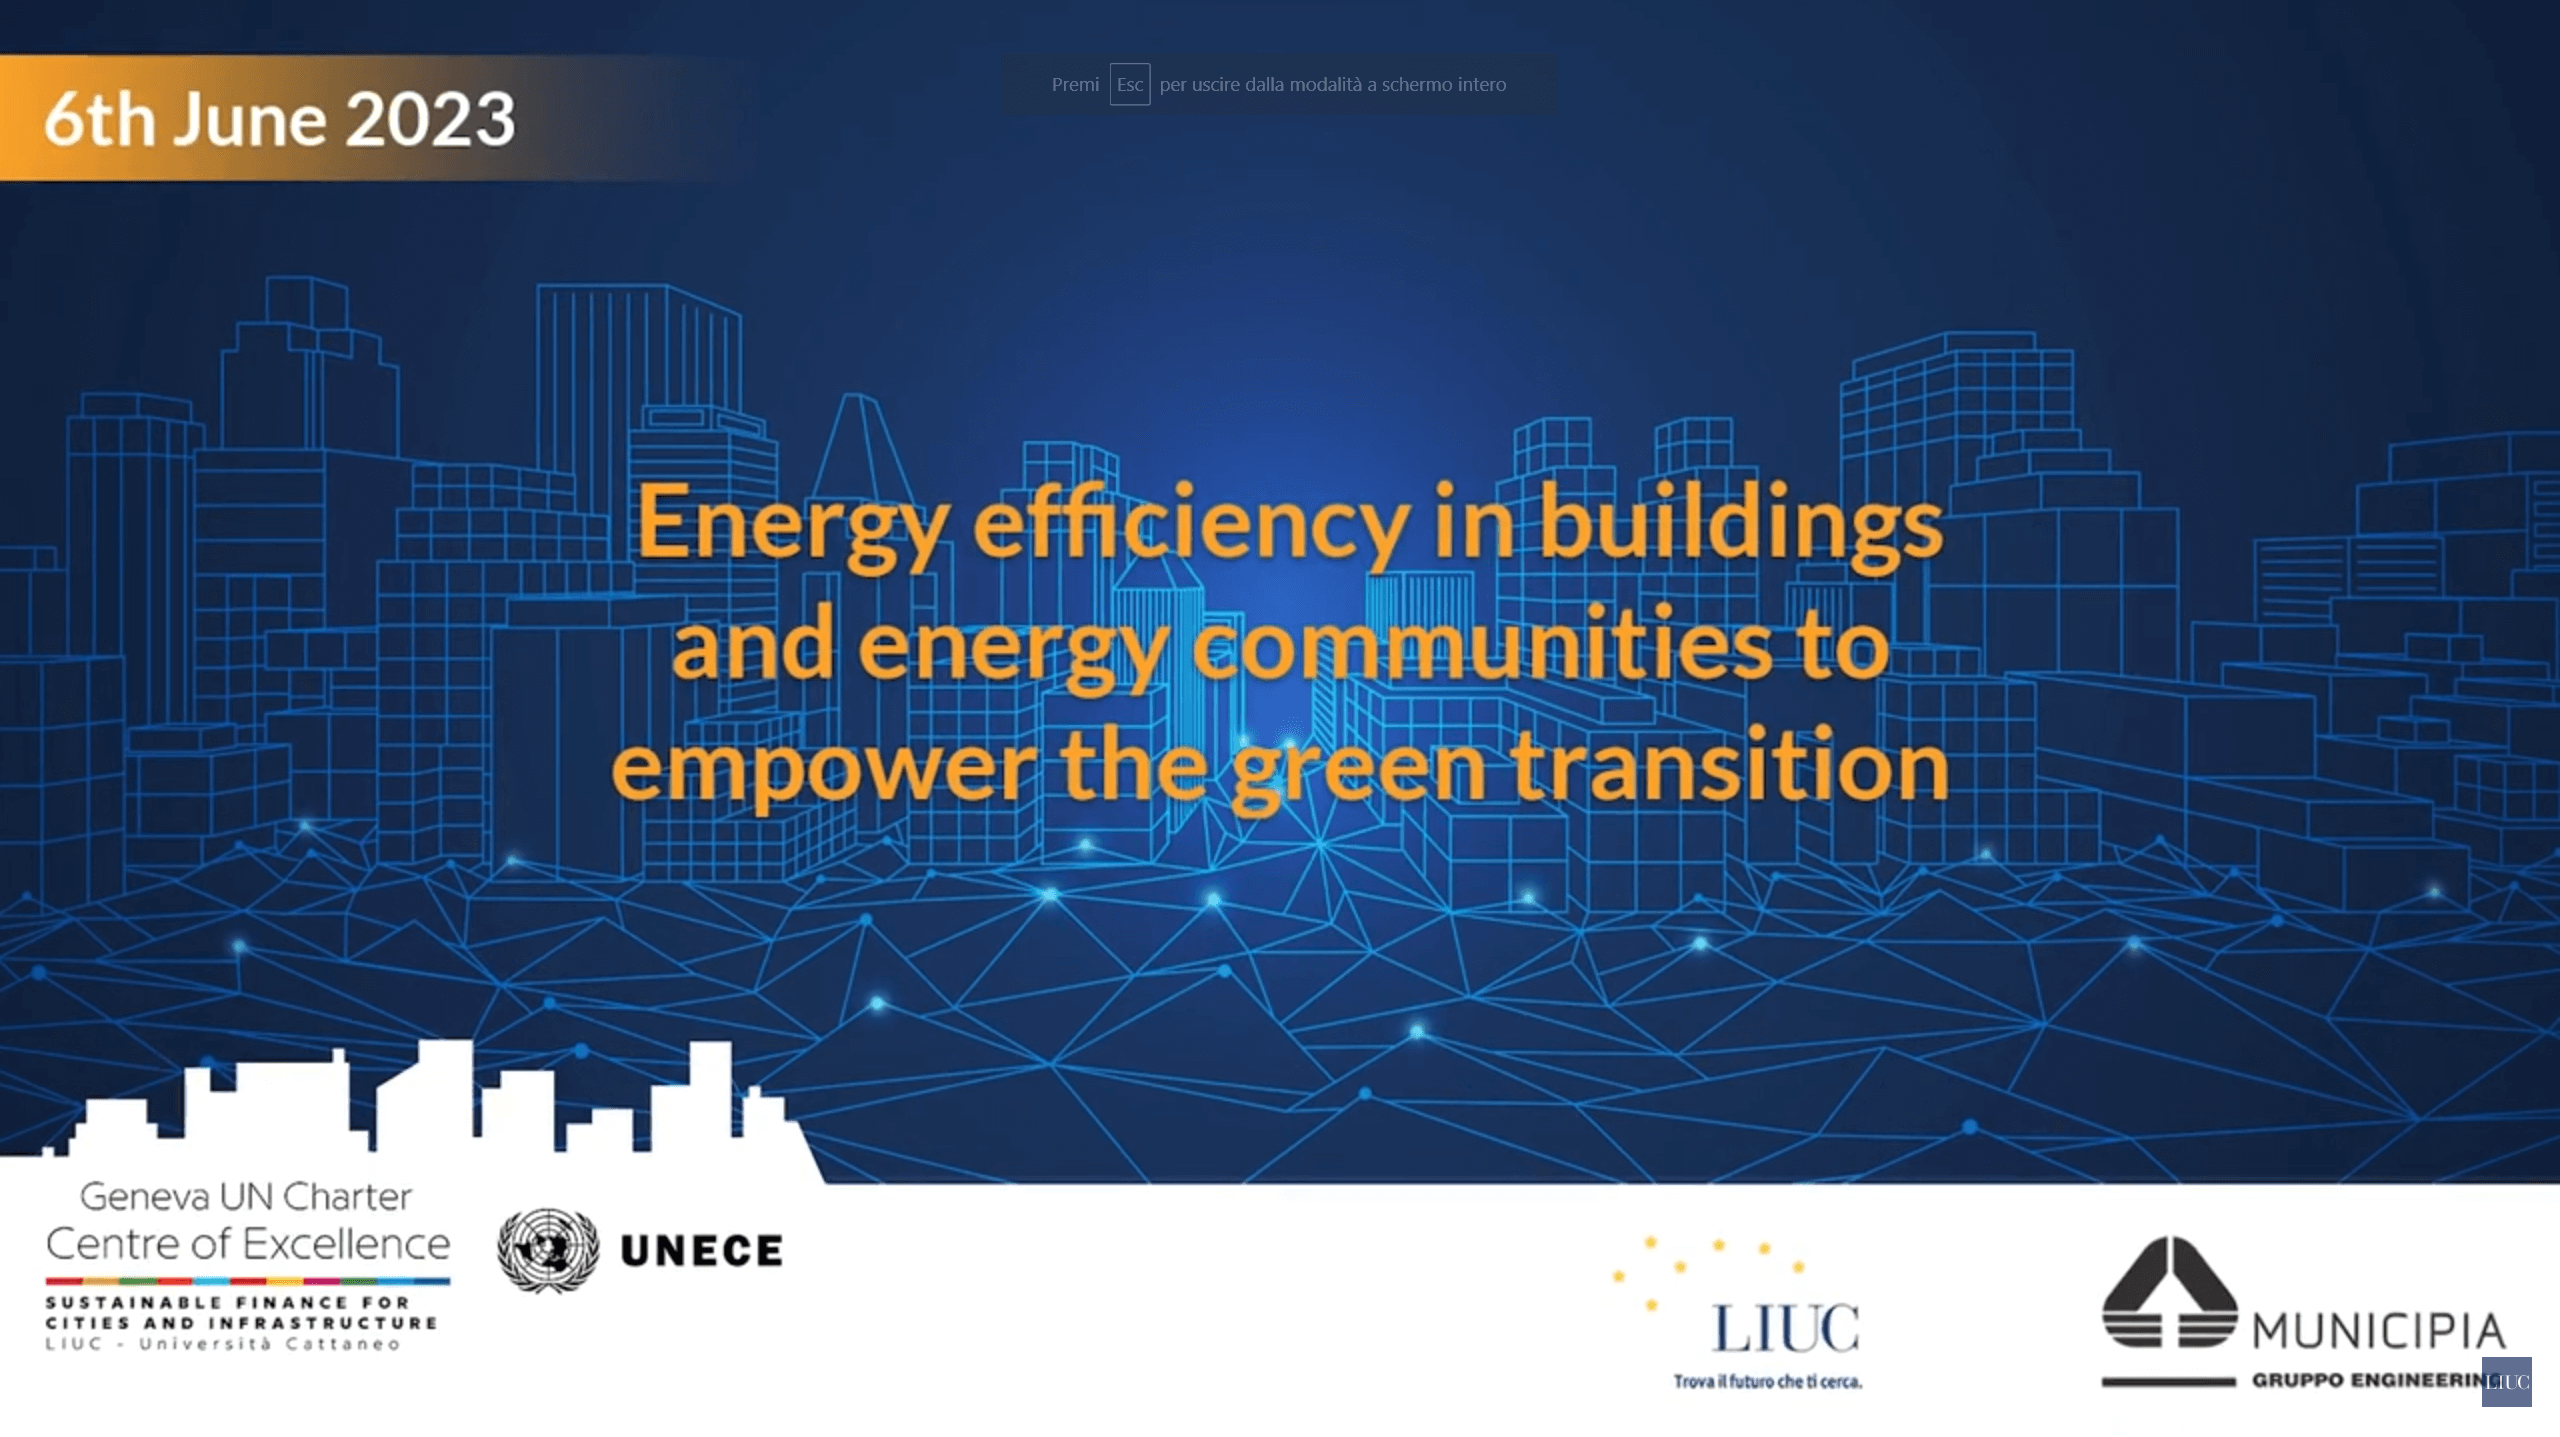 Energy efficiency in buildings and energy communities to empower the green transition